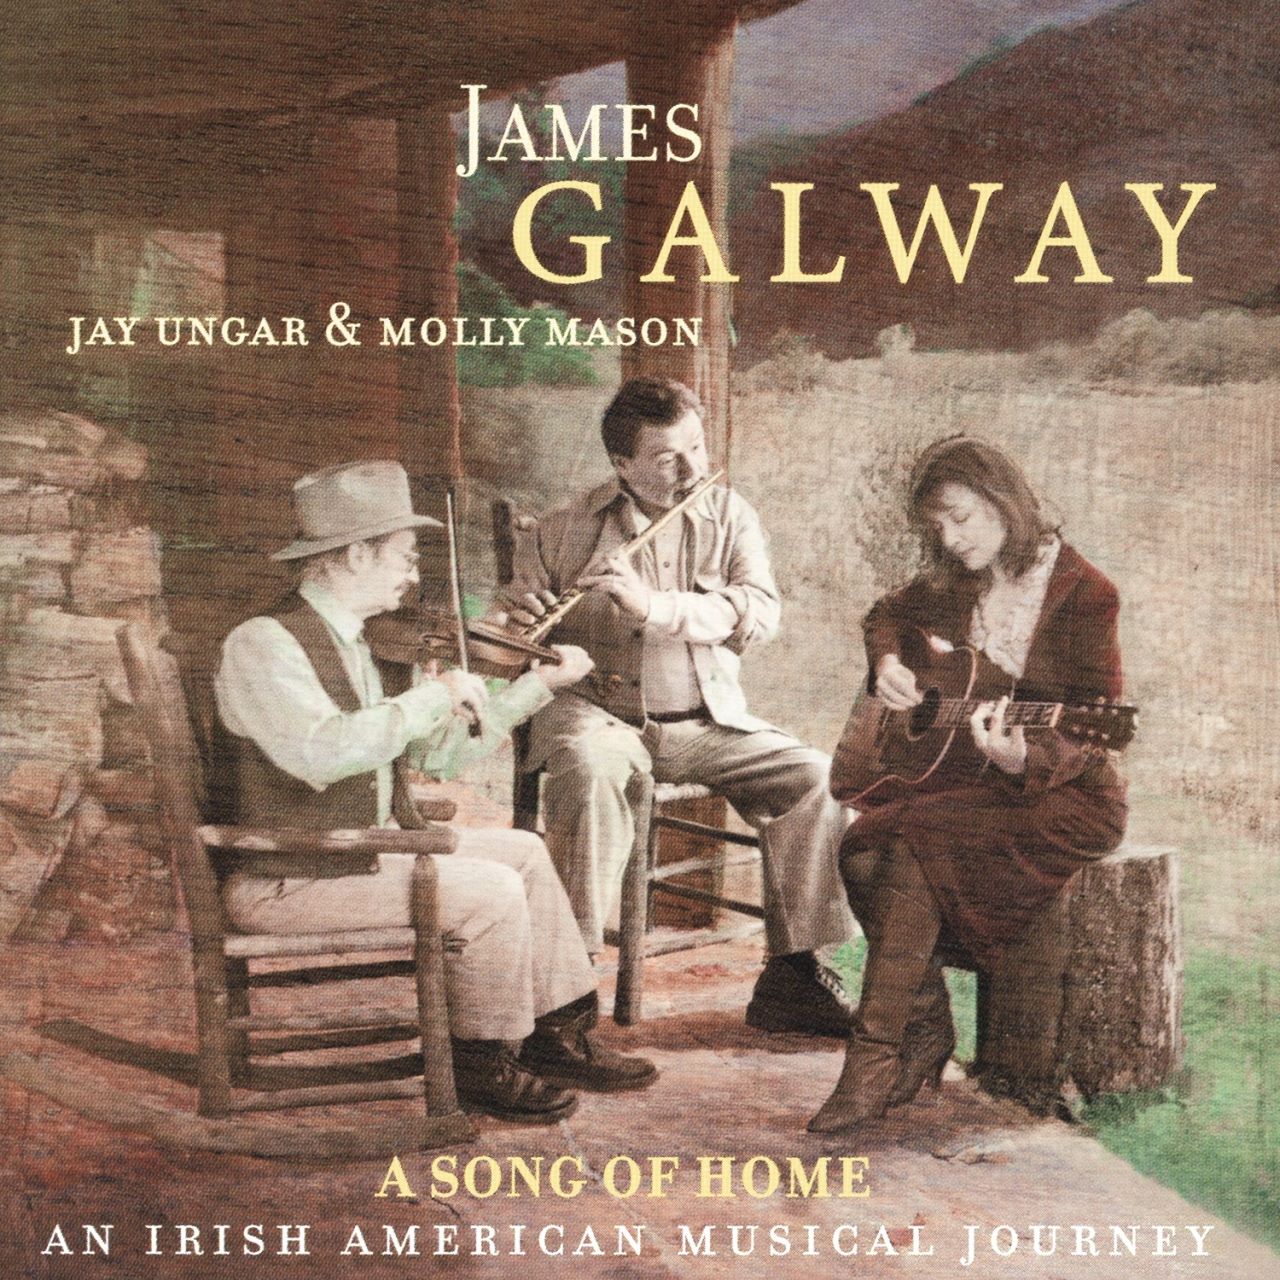 James Galway, Jay Ungar & Molly Mason - A Song Of Home cover album